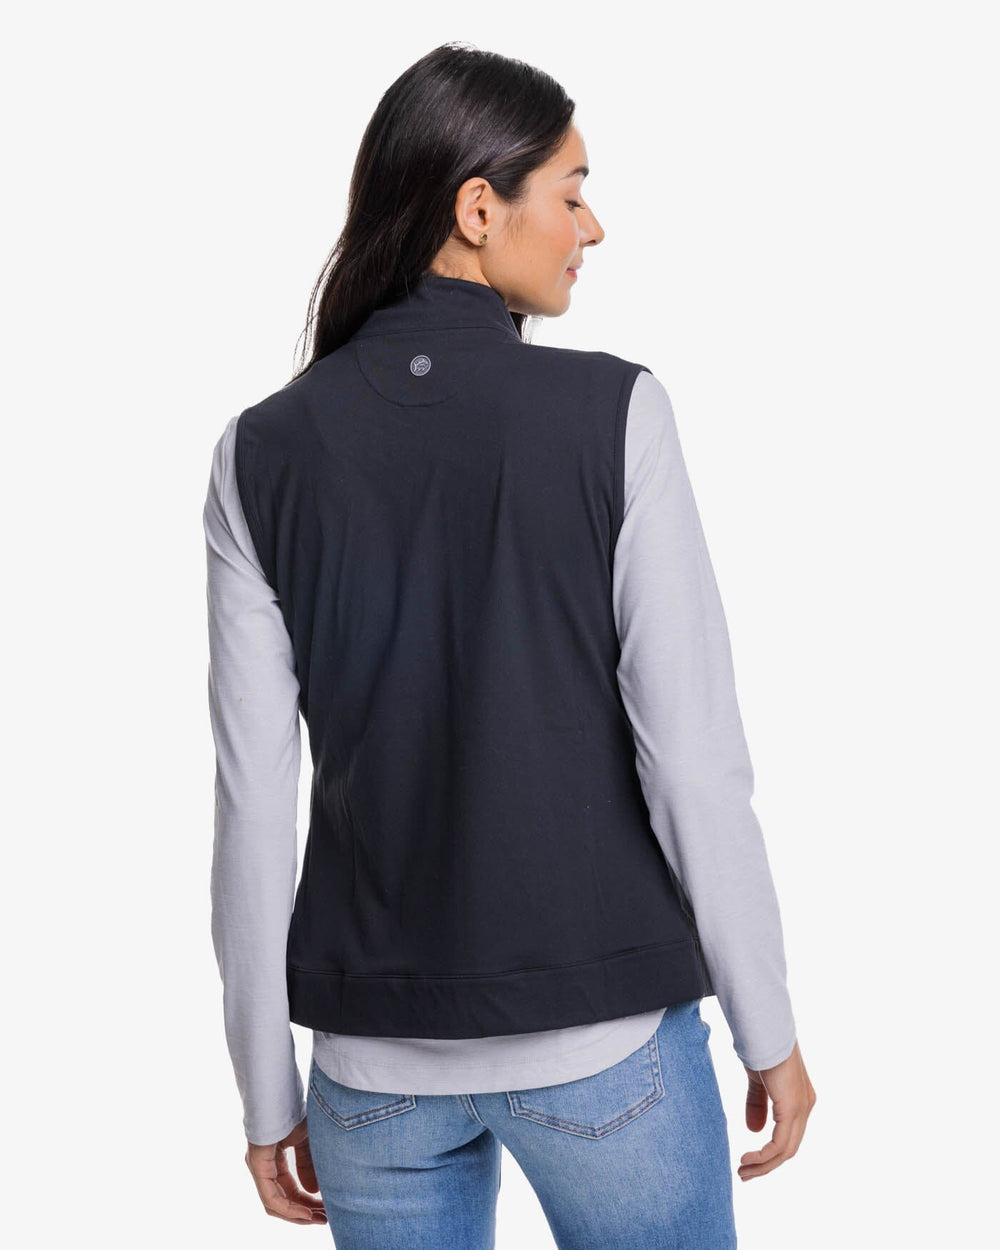 The back view of the Southern Tide Shawna Mixed Media Vest by Southern Tide - Midnight Black